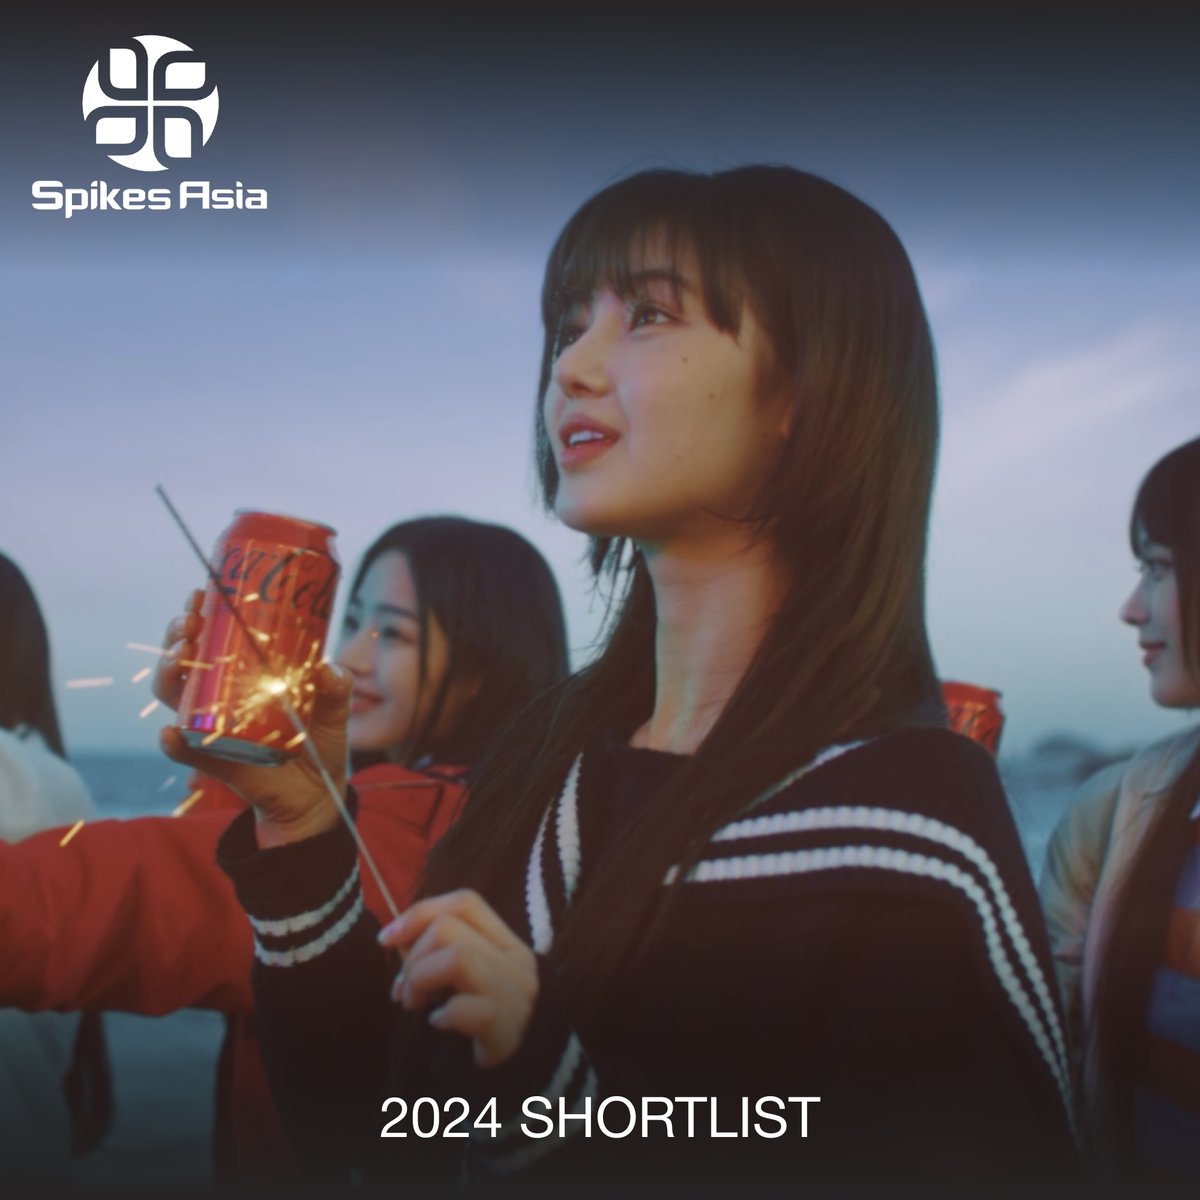 #SpikesAsia2024 SHORTLIST
Coca-Cola Massita with NewJeans
Category: Partnerships in Talent / Brand or Product Integration into Music Content

#NewJeans #뉴진스
#NewJeans_is_Everywhere